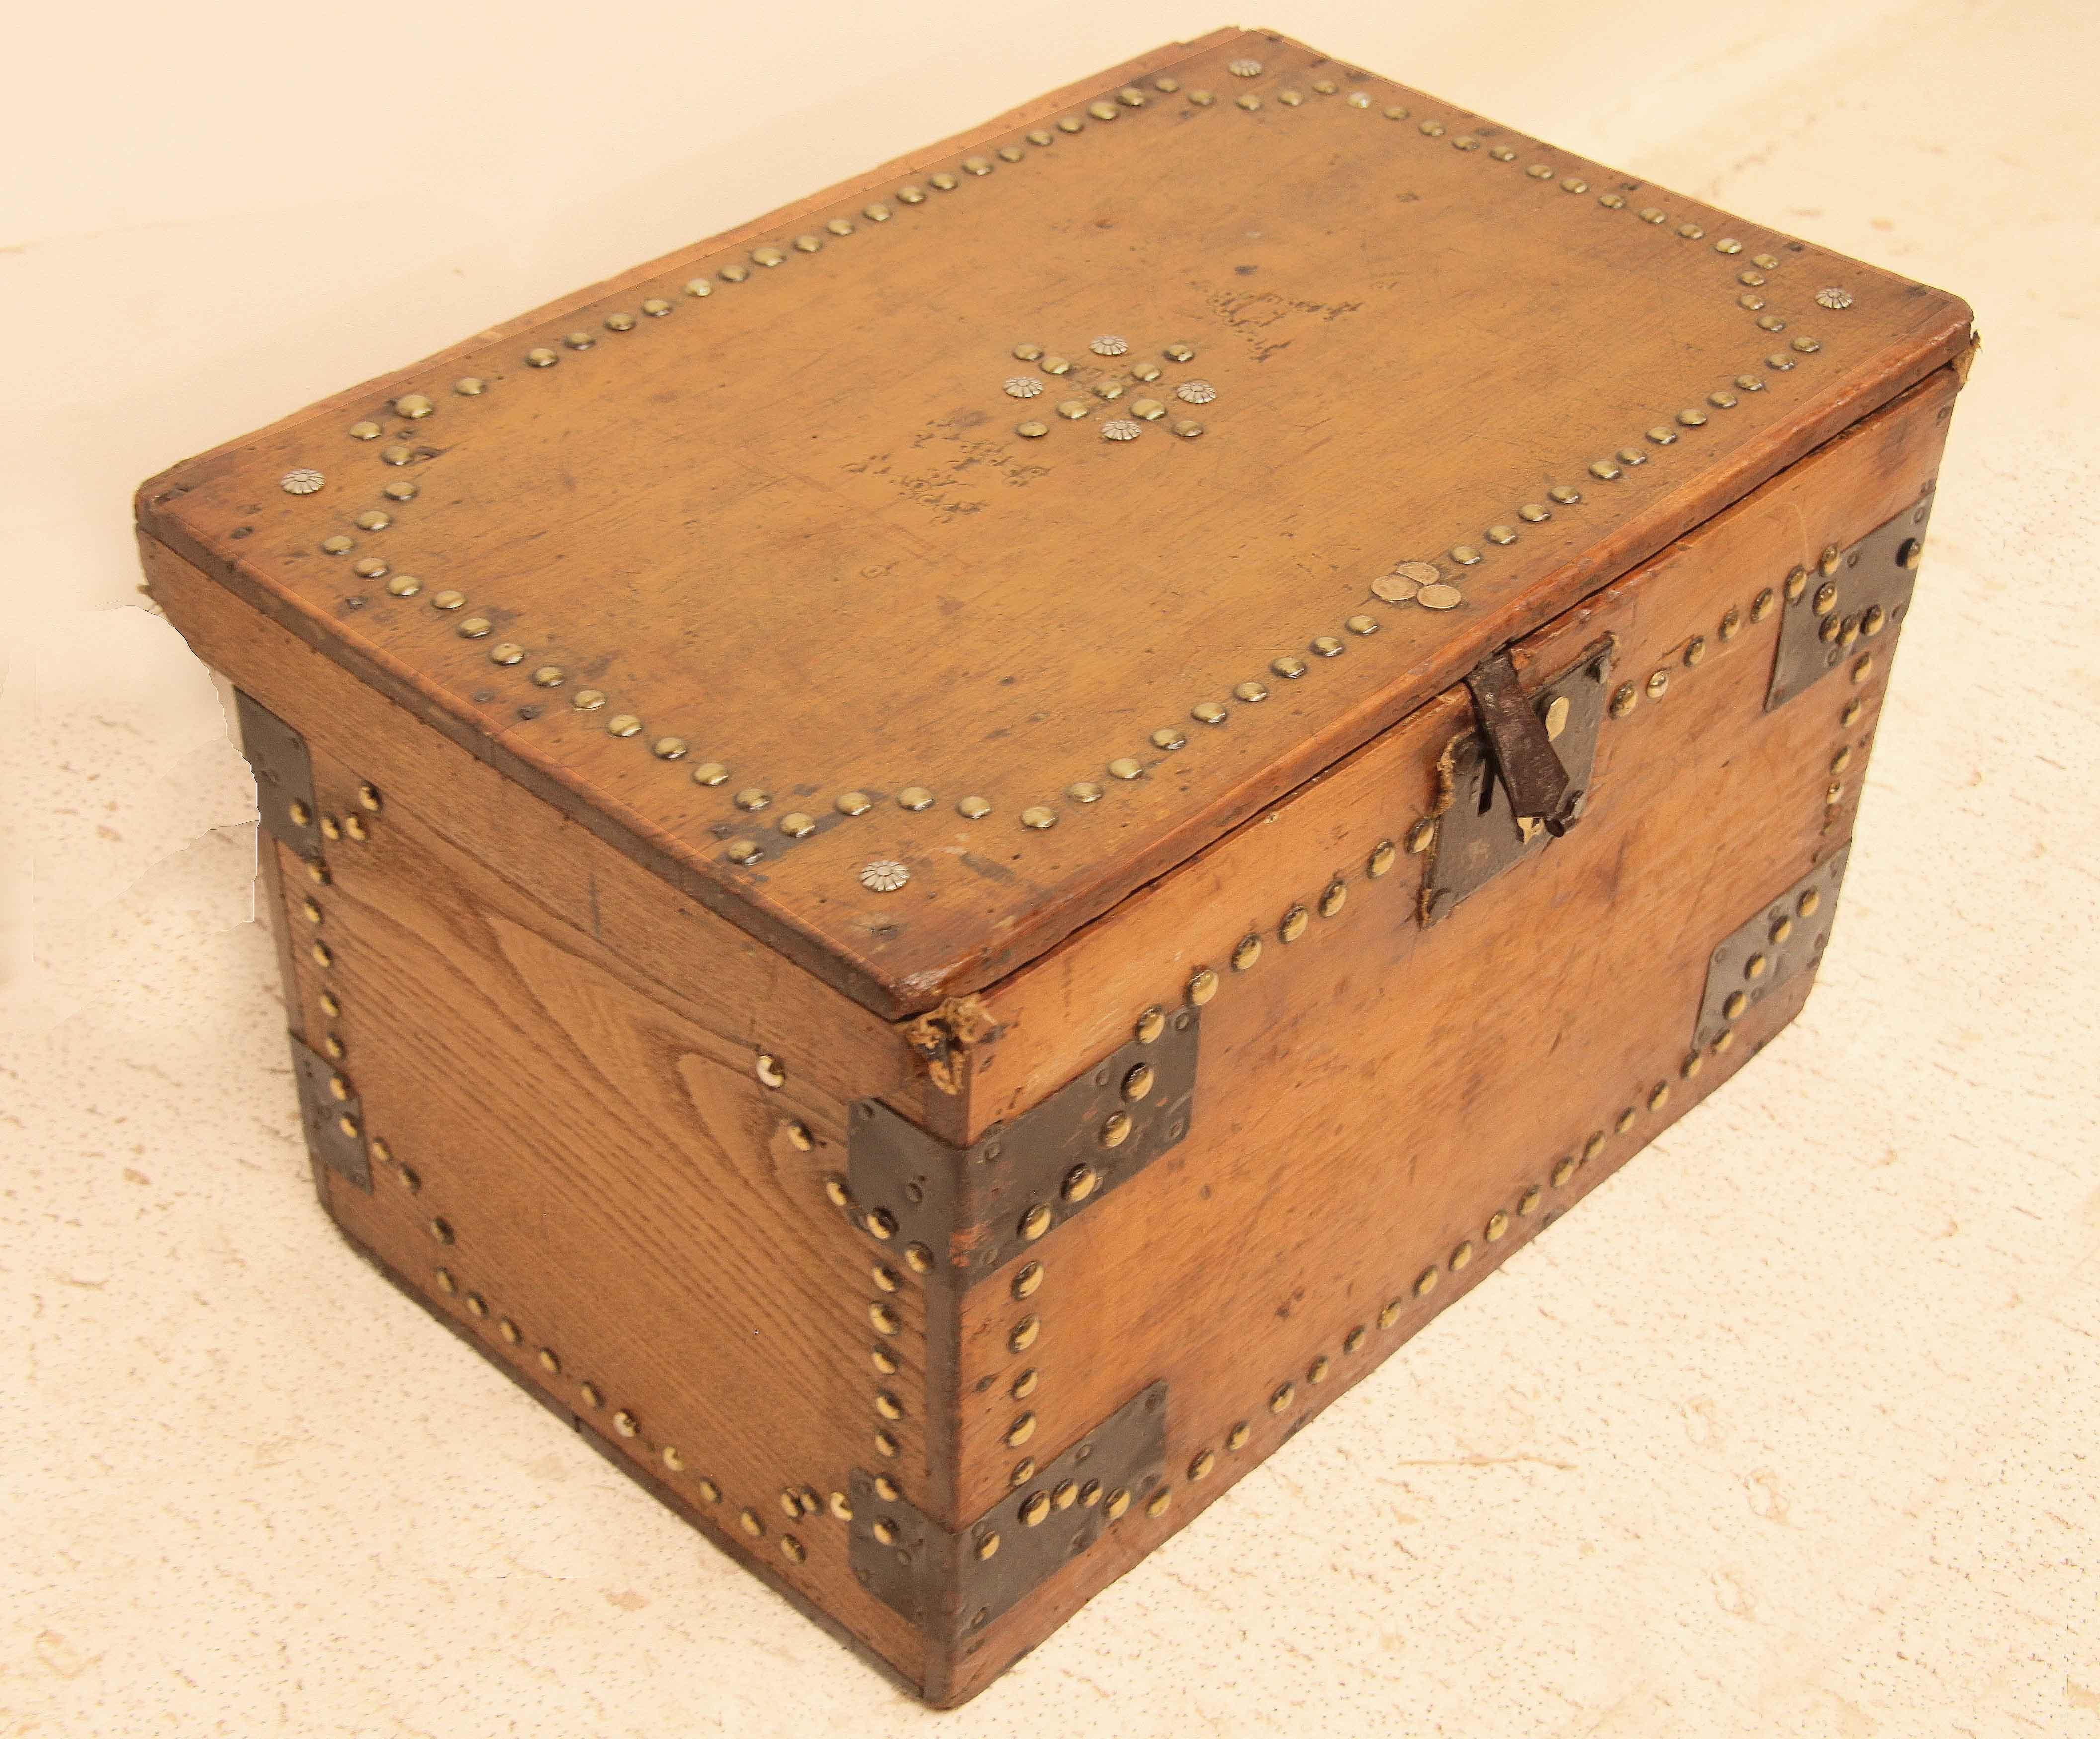 English steel bound pine box, the front and sides are secured with steel bindings, the top, front and sides are decorated with brass buttons ( nail heads ) , the top has brass buttons in the center with remnants on each side of the initials 